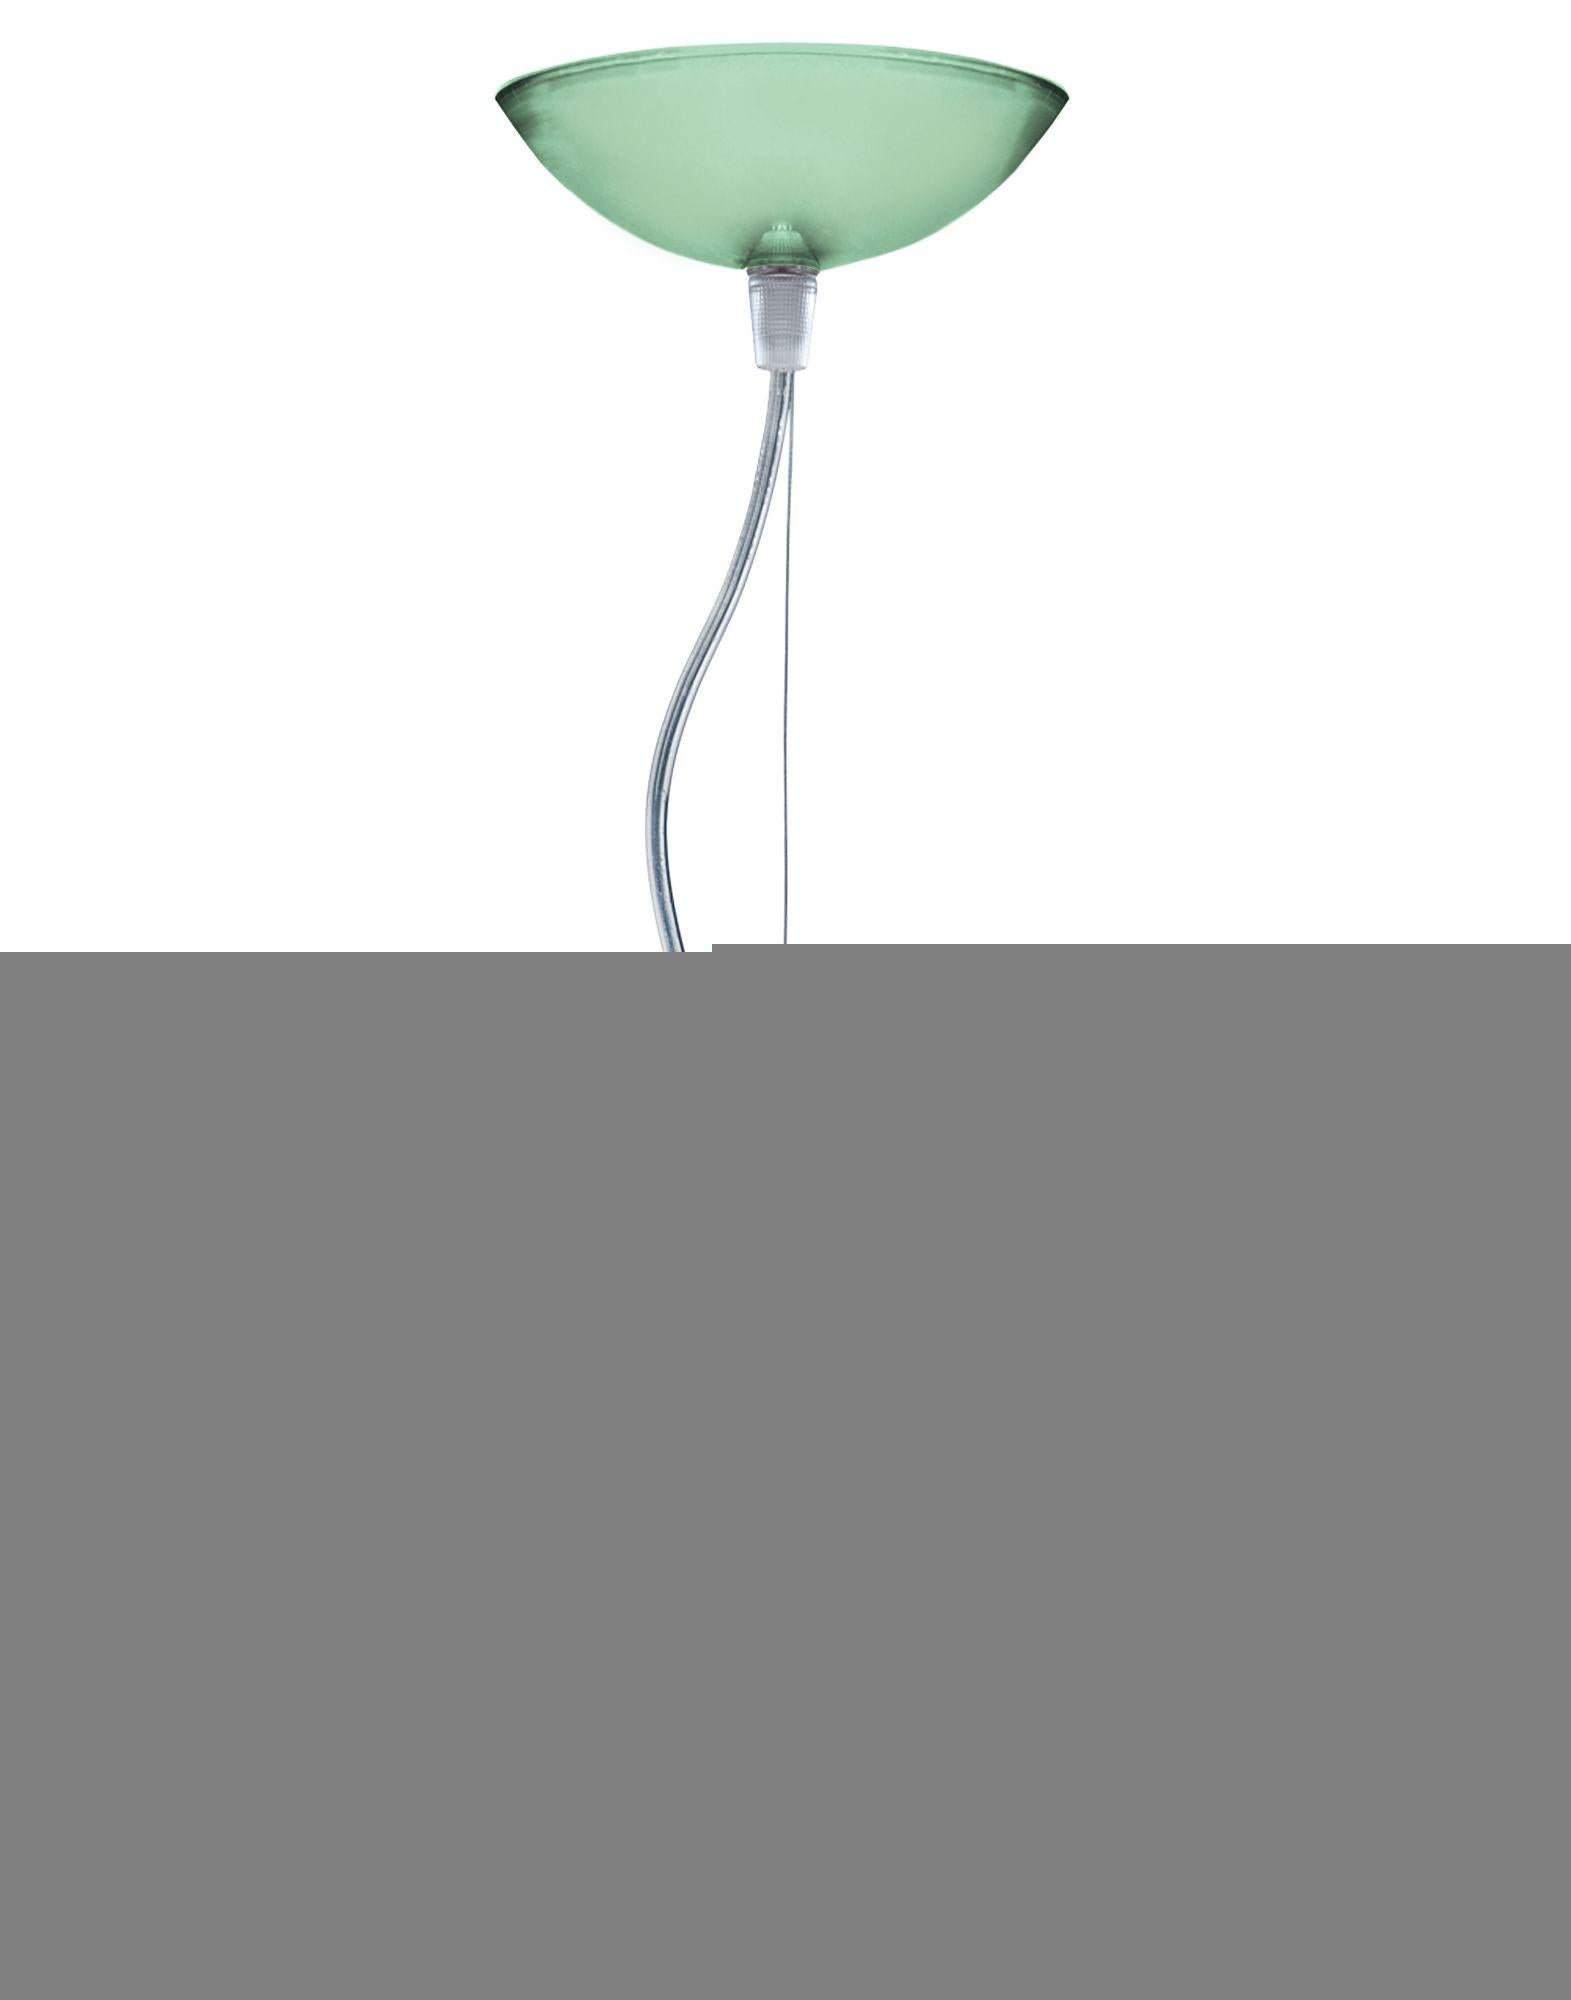 FL/Y pendant light small in sage green. It is a collection of pendant lamps designed by Ferruccio Laviani in 2002.

Dimensions: Shade height: 11 in.; diameter: 15 in.; unit weight: 1.08 kg. Made of: PMMA. Assembly required. Voltage: 120. Cord